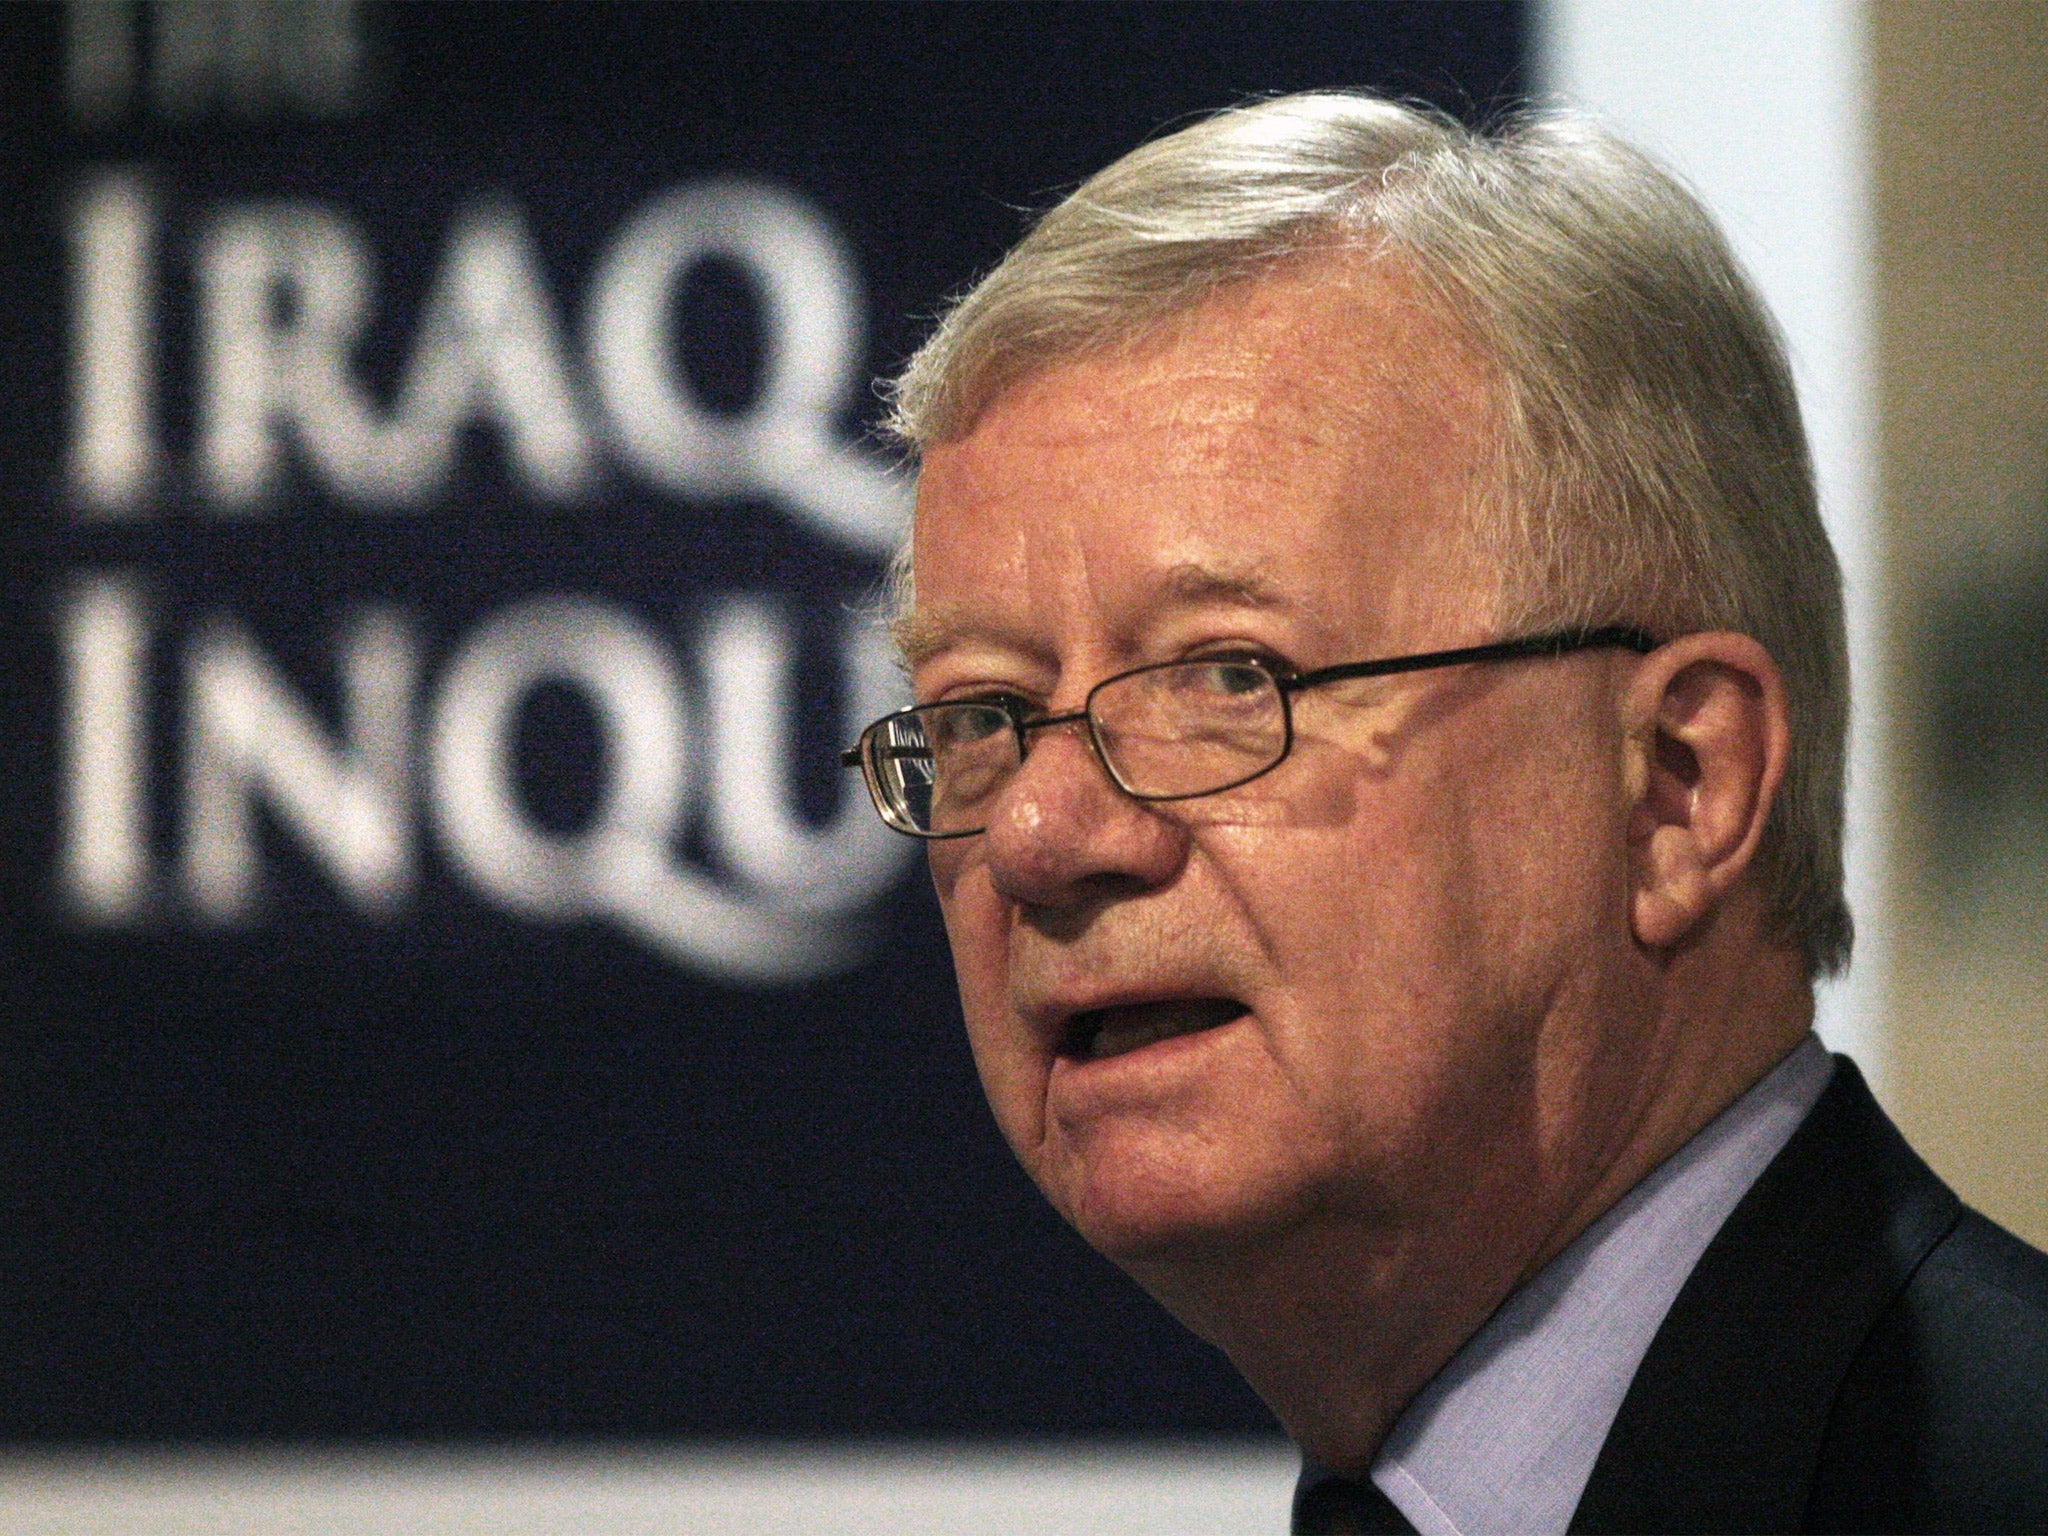 Sir John Chilcot first announced the terms of reference of his inquiry into the causes of the Iraq war in 2009